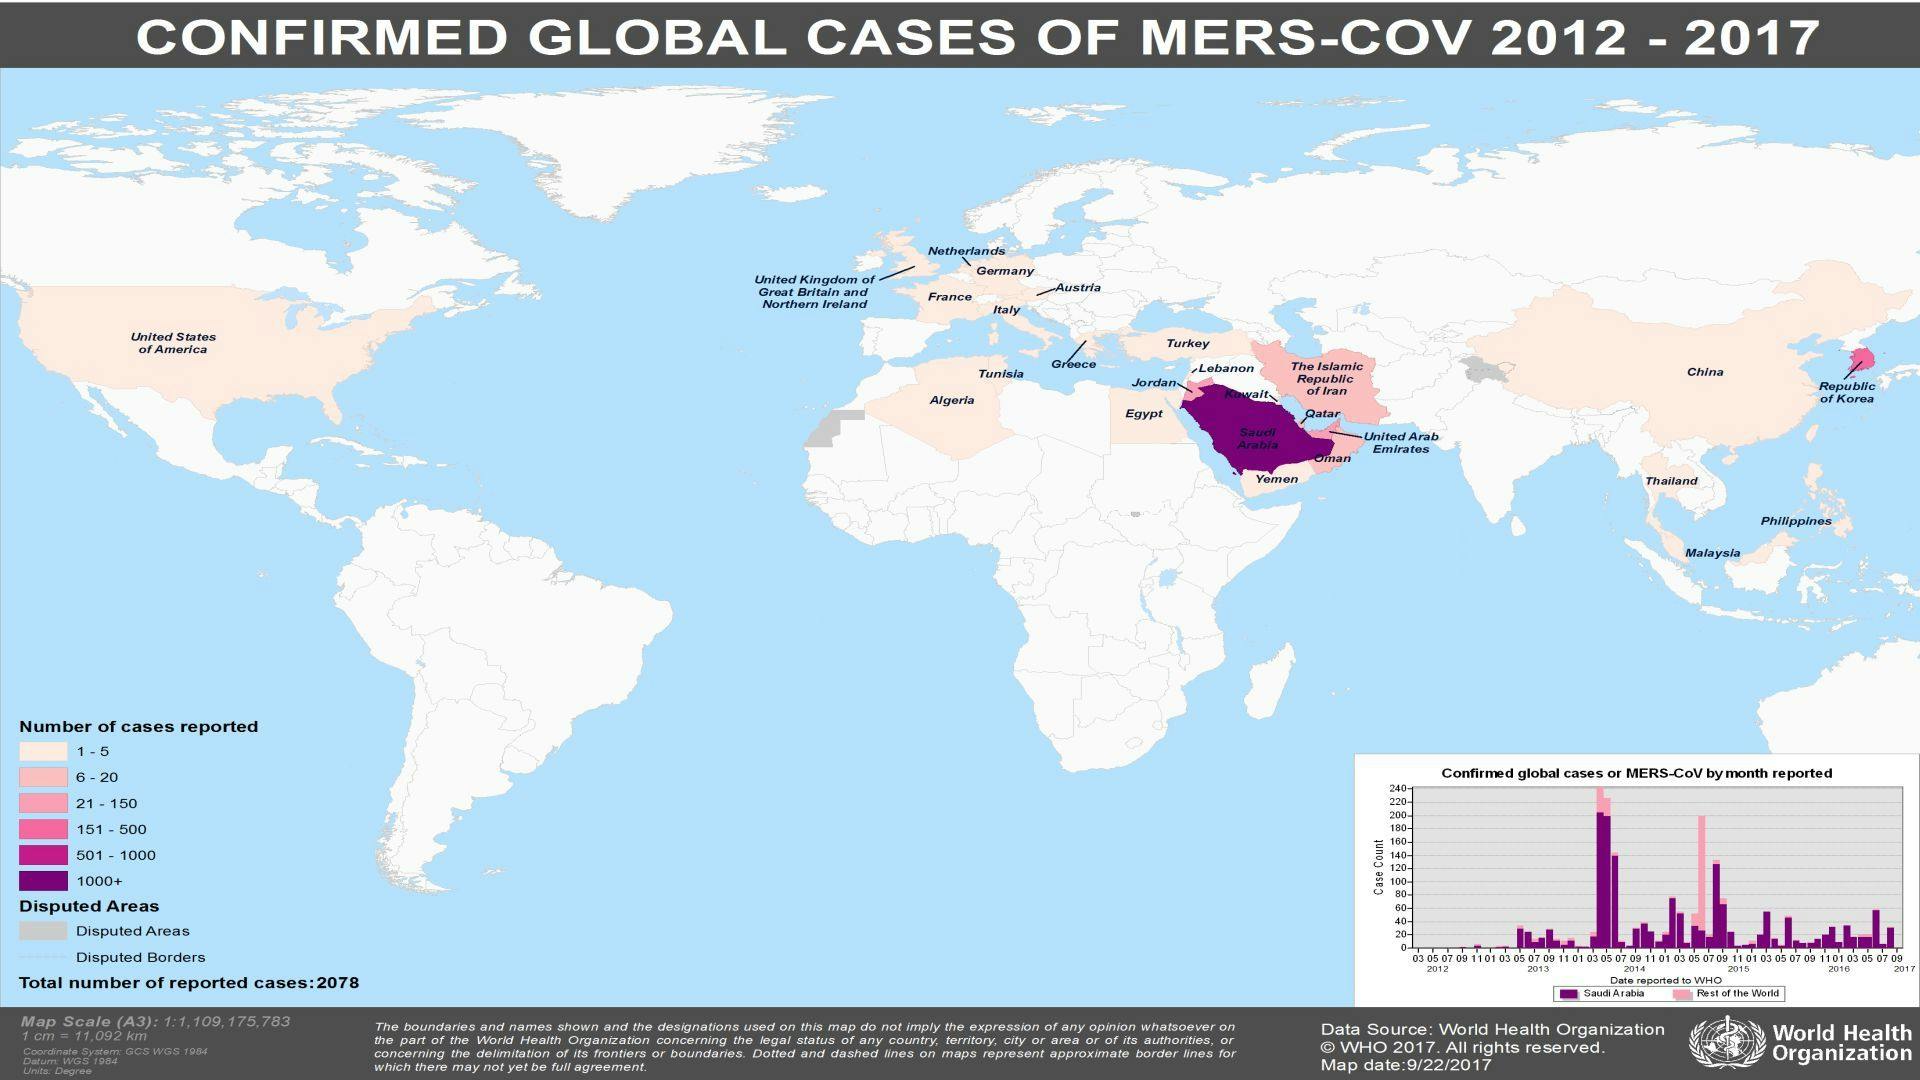 Experts Agree on Next Steps to Combat MERS-CoV